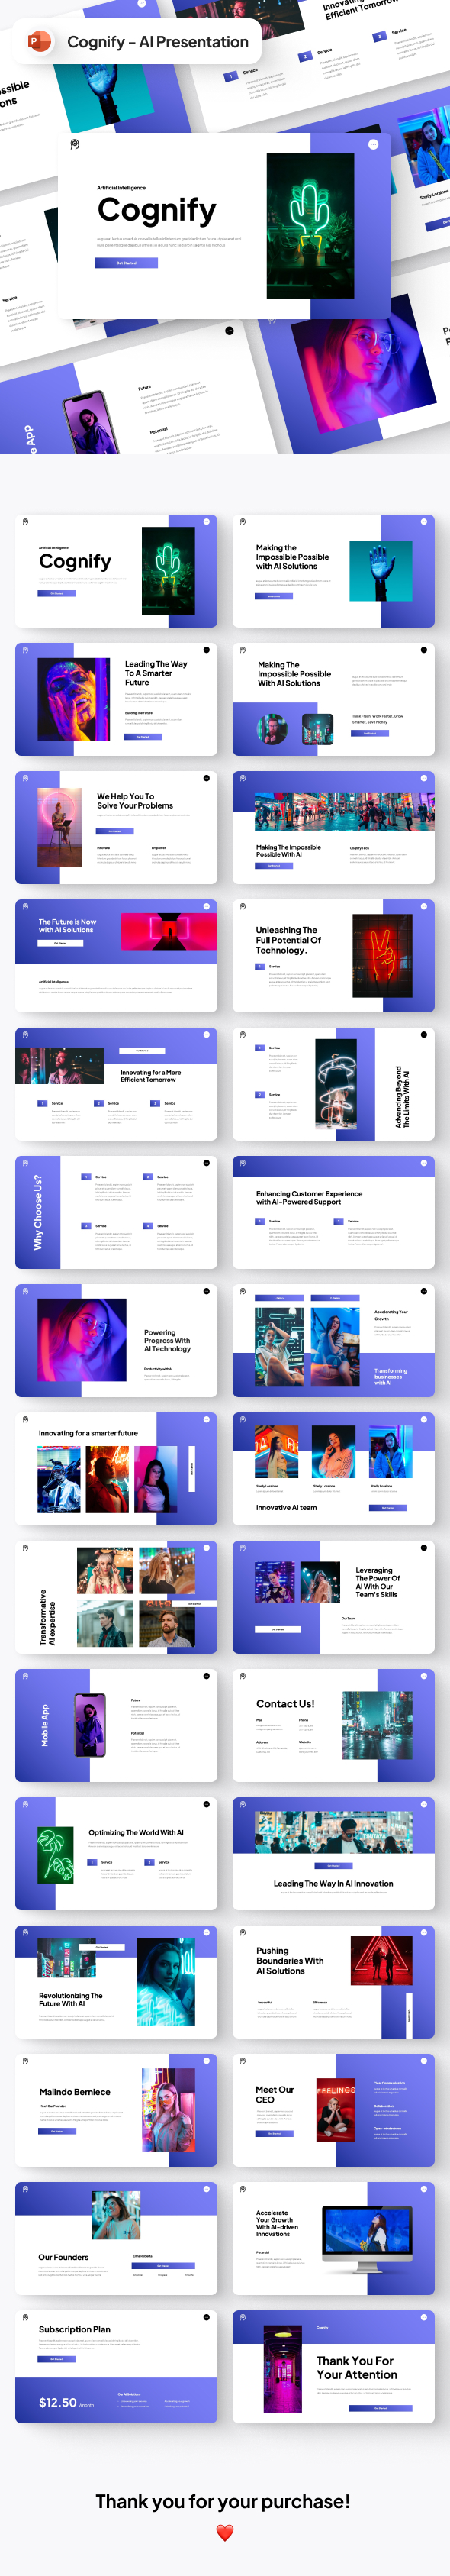 Cognify - Artificial Intelligence Powerpoint Presentation Template